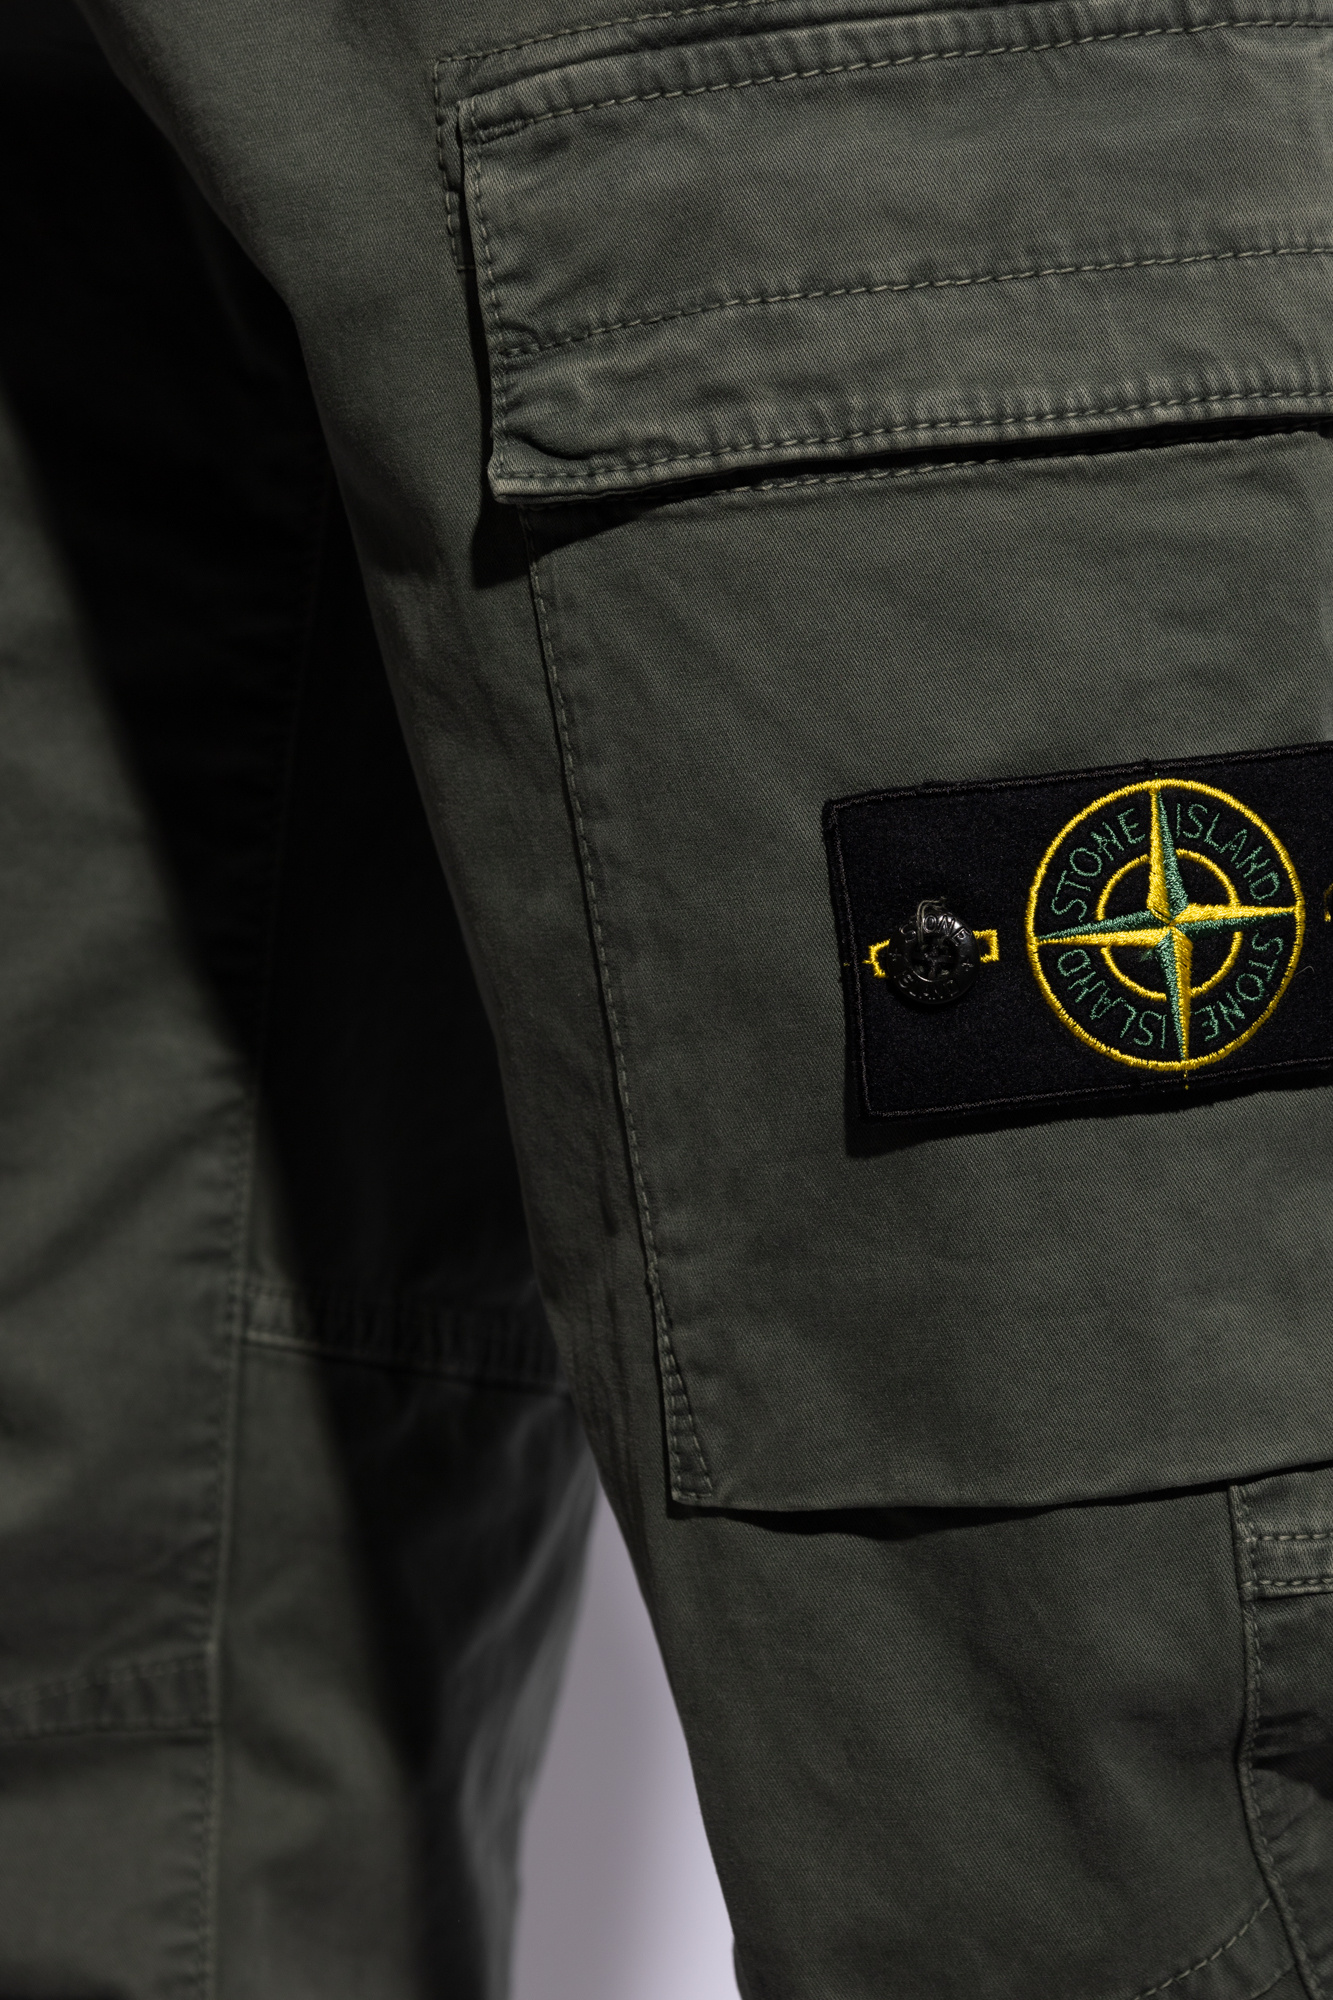 Stone Island Cargo middle trousers